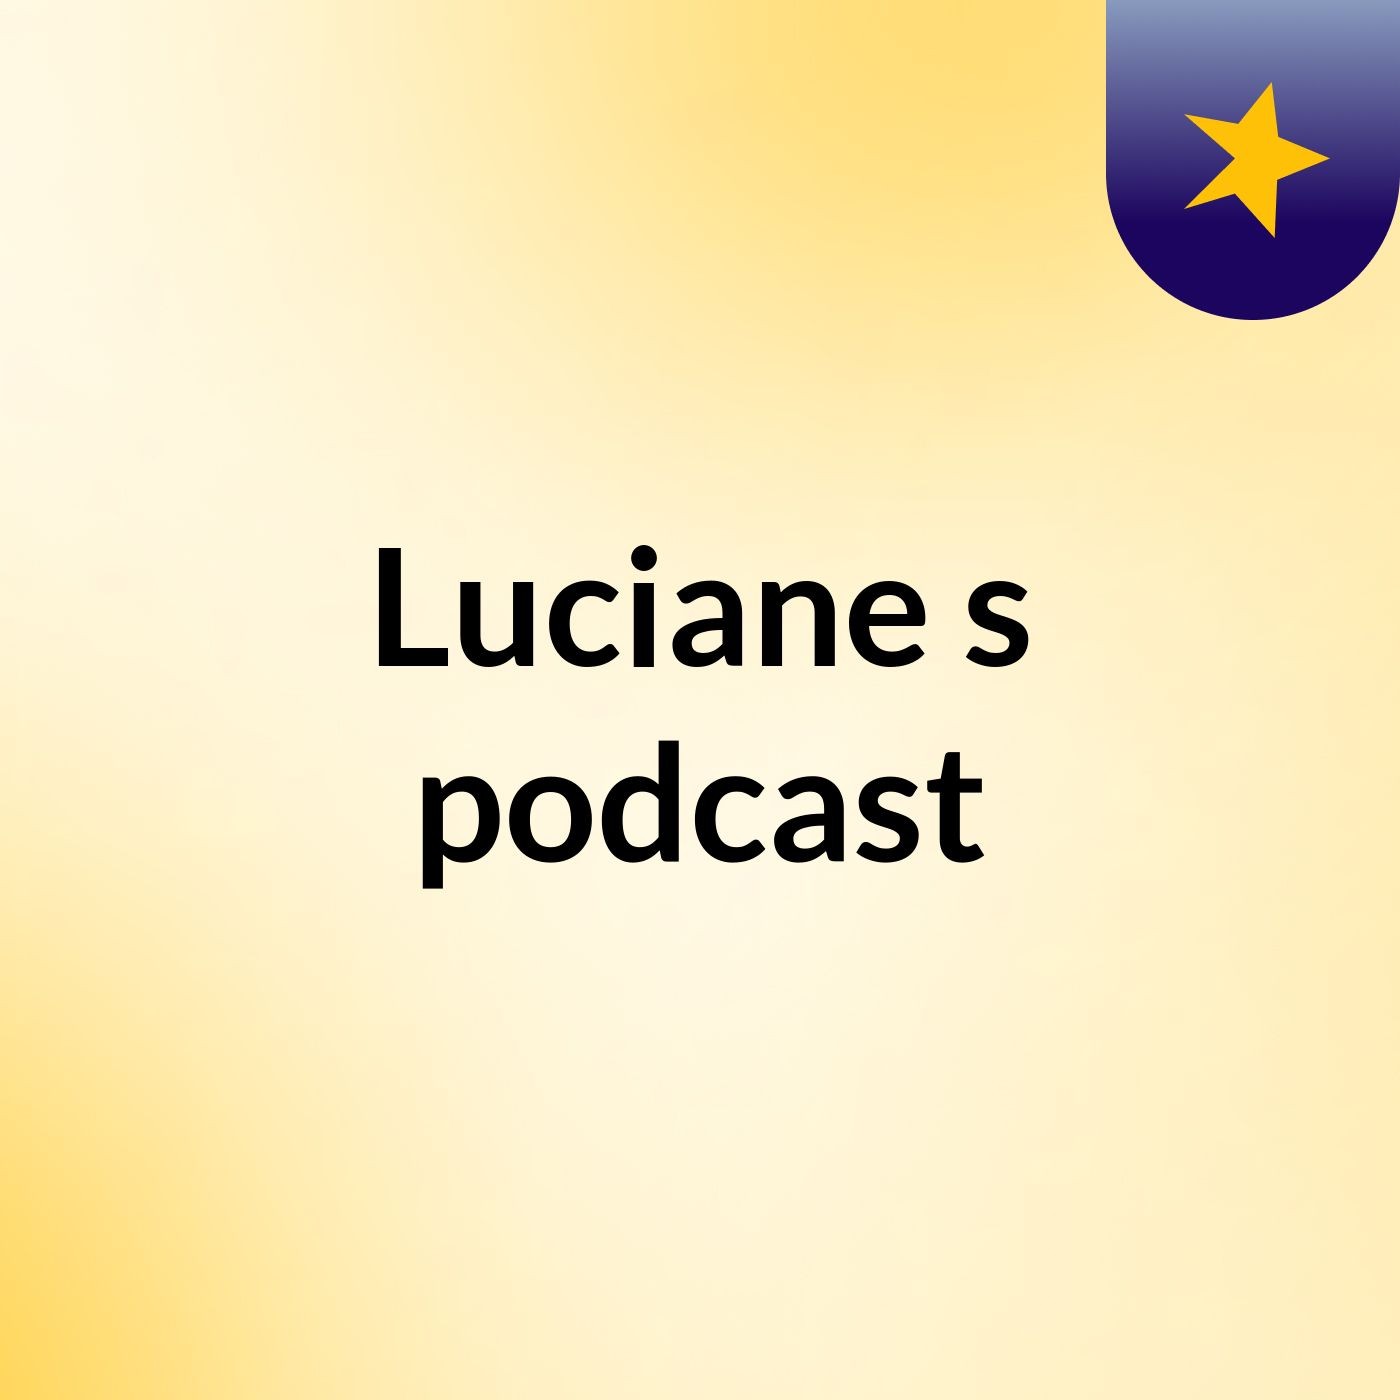 Luciane's podcast